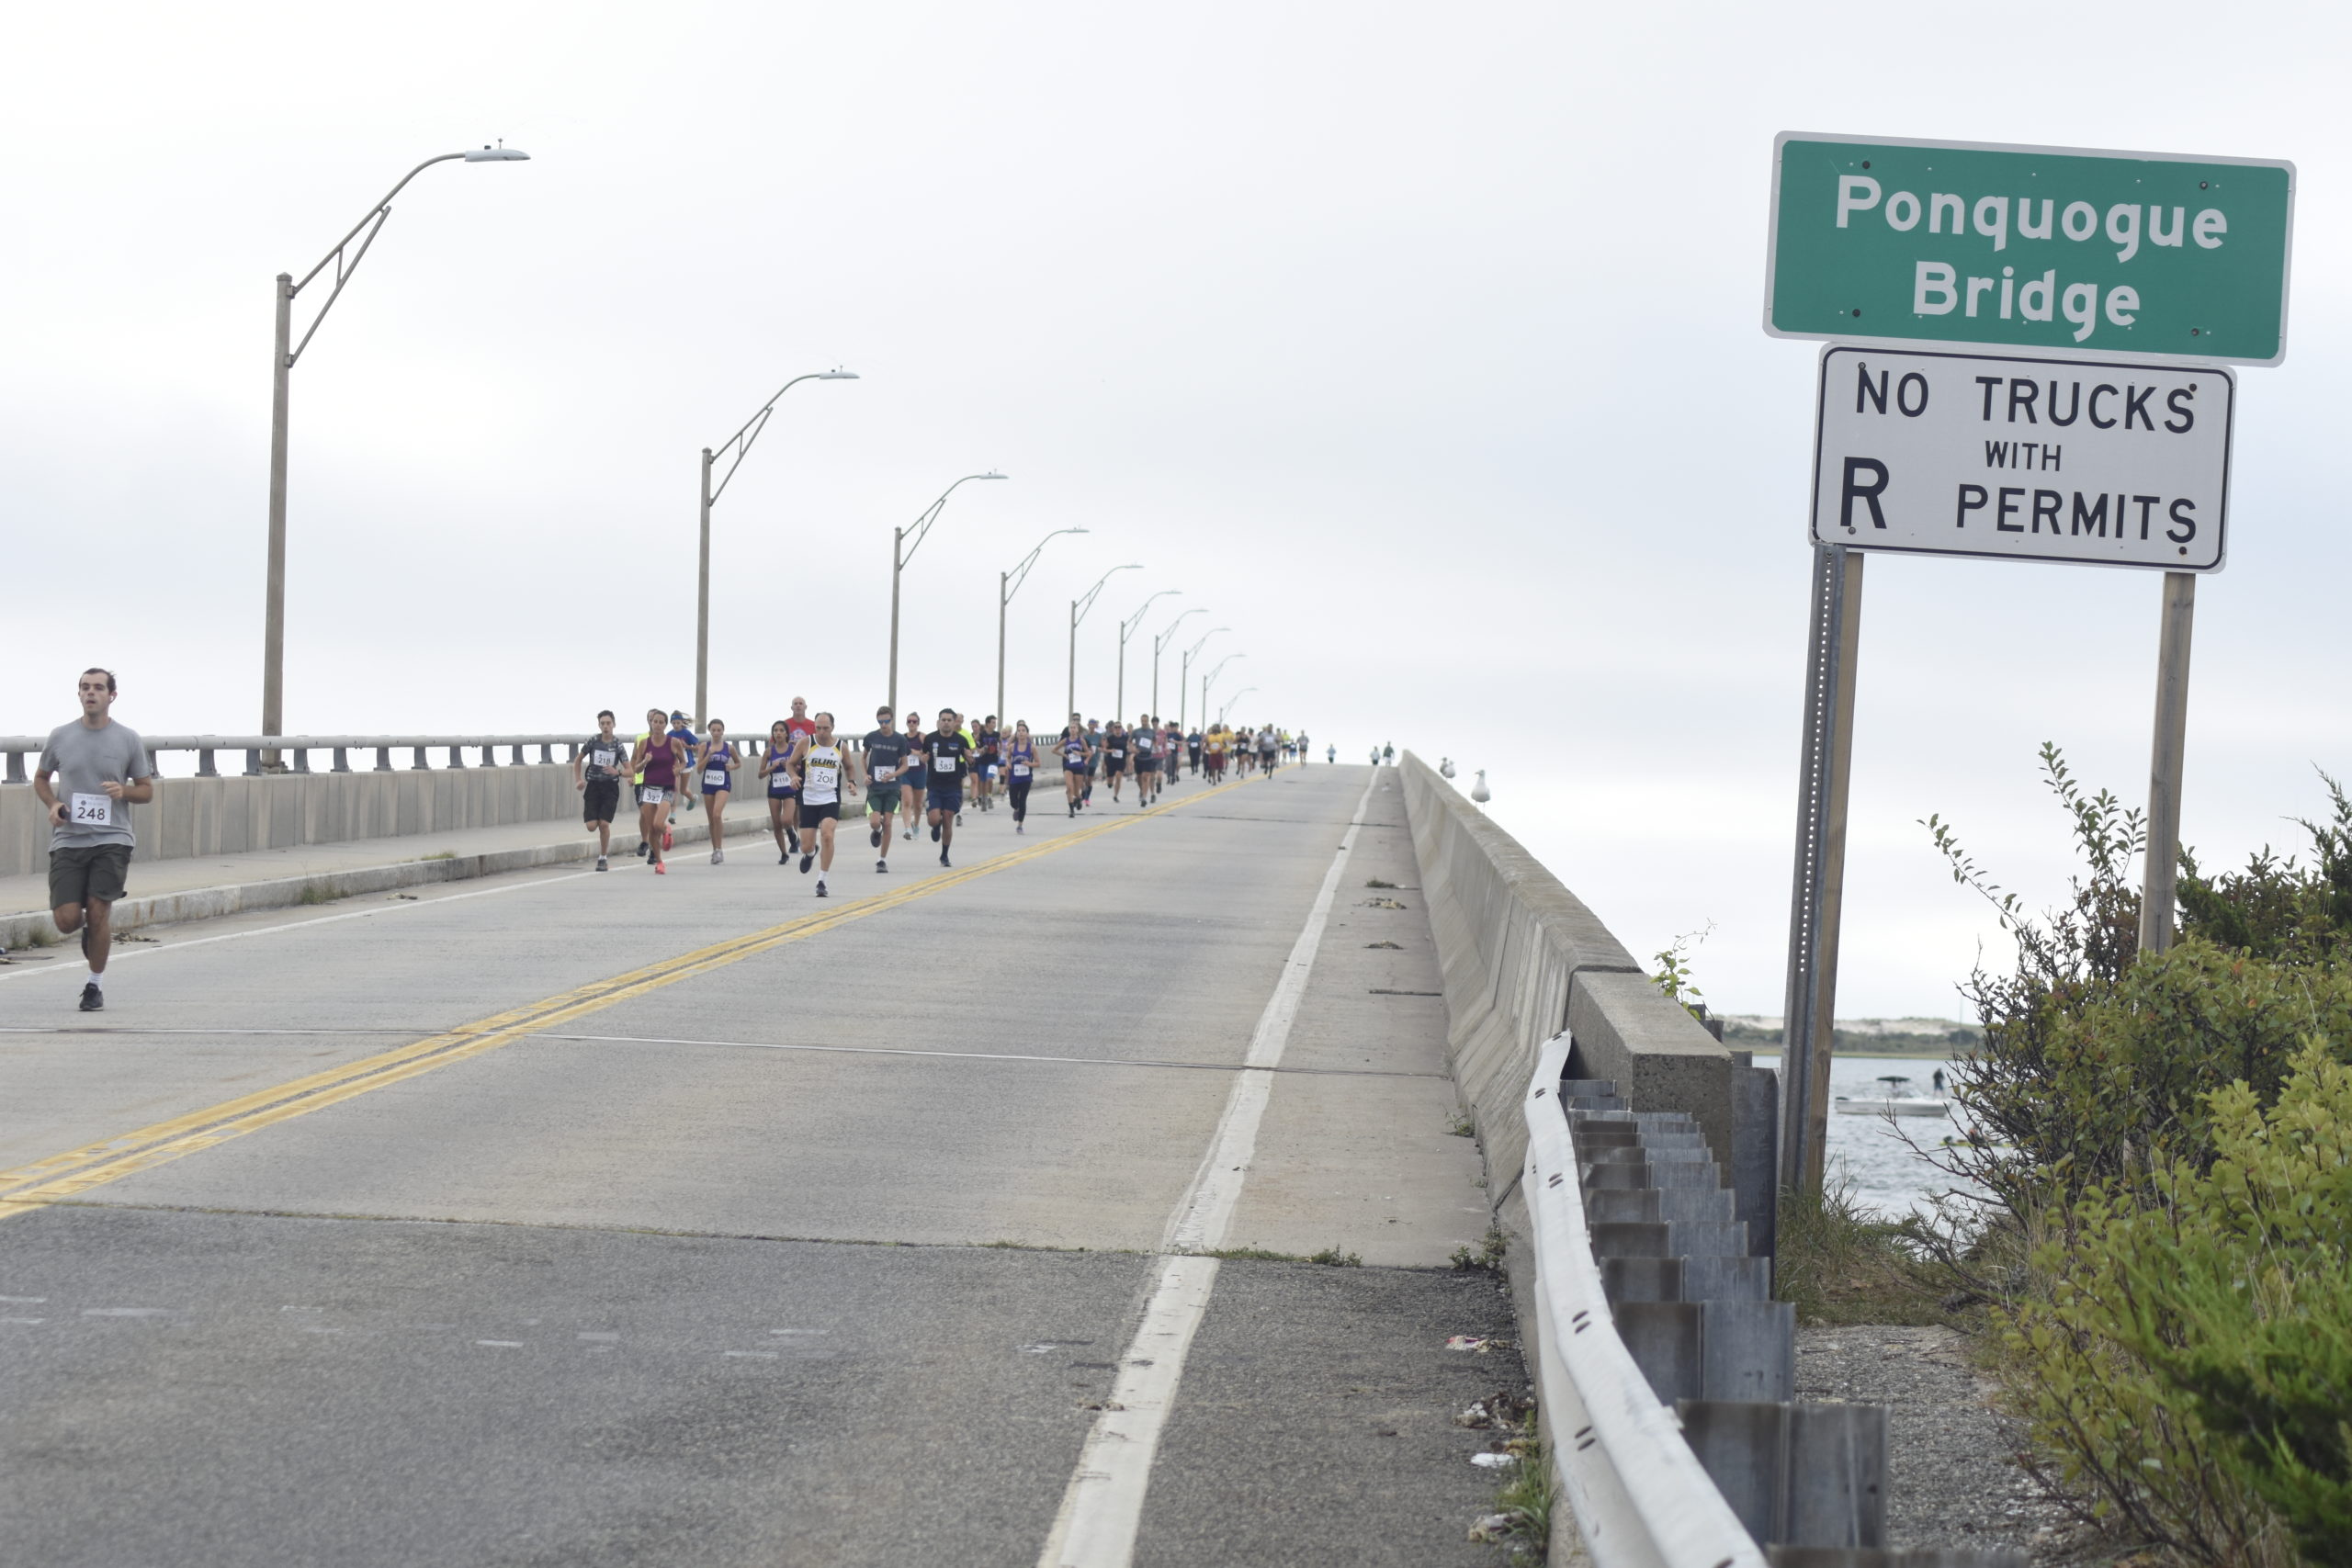 Runners make their descent over Ponquogue Bridge on Saturday morning for the Over The Bridge 10K and 5K races.